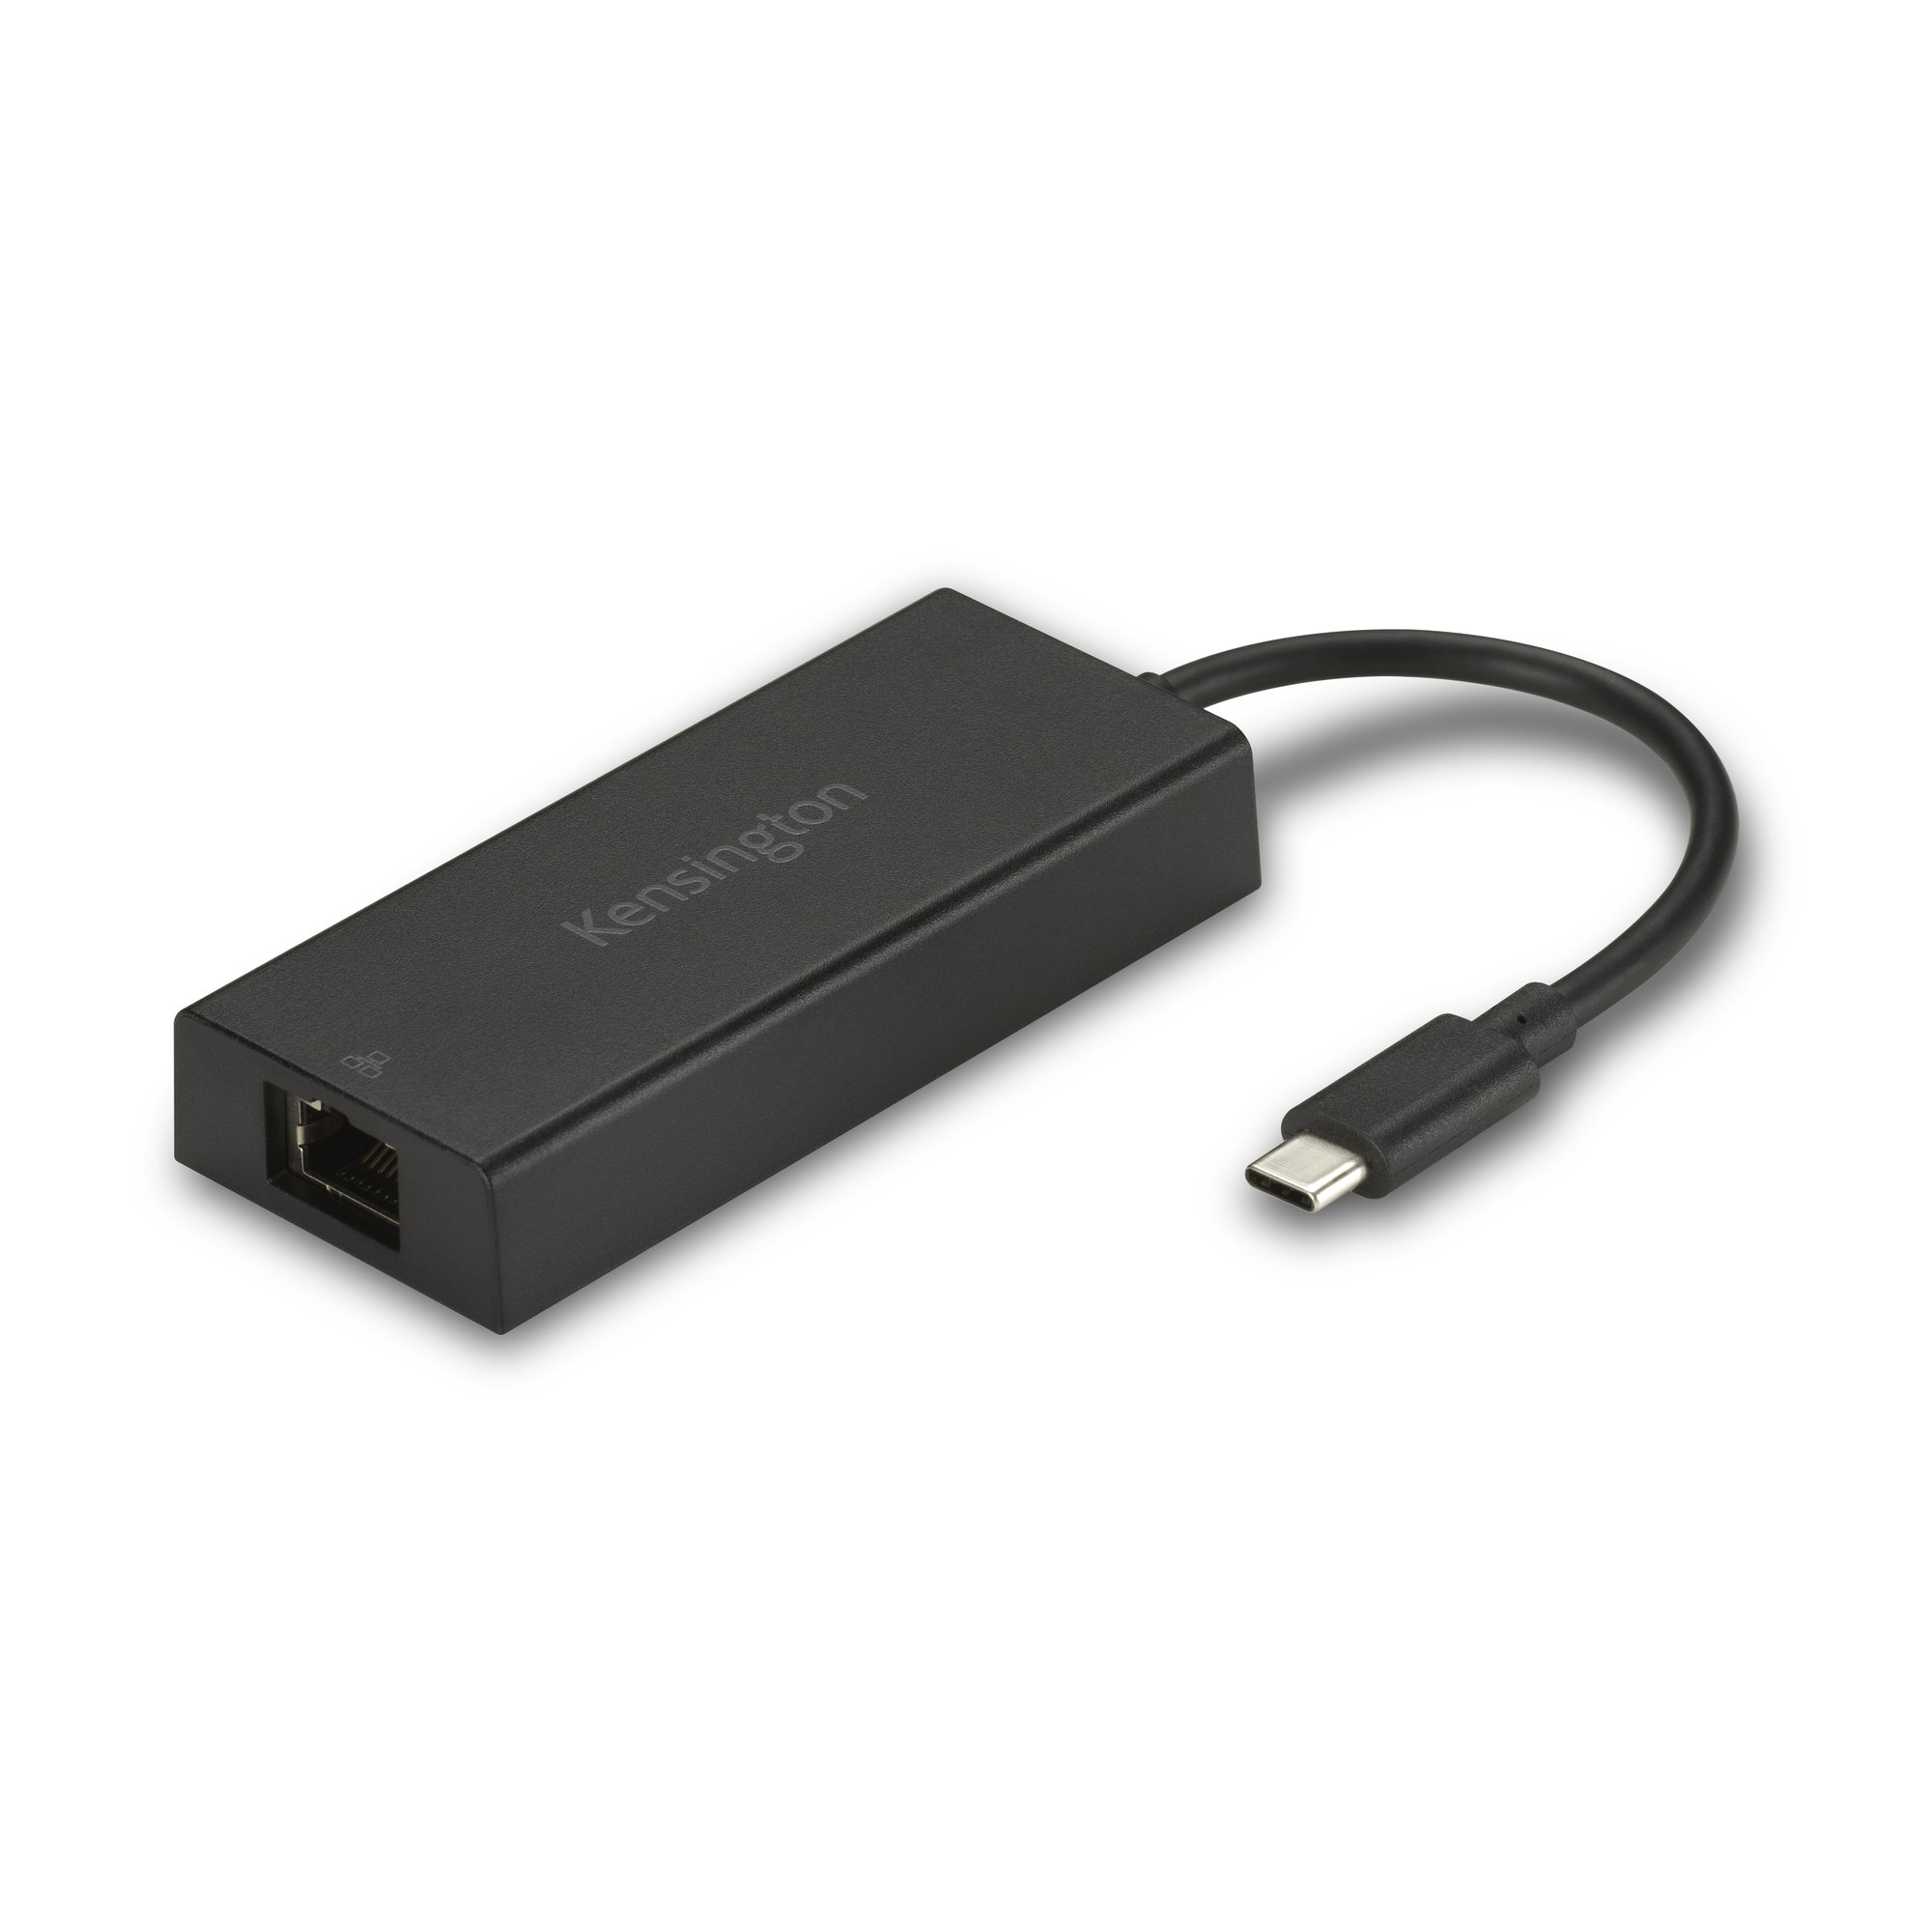 Kensington K38295WW Managed USB-C to 2.5G Ethernet (PXE Boot and DASH) Adapter